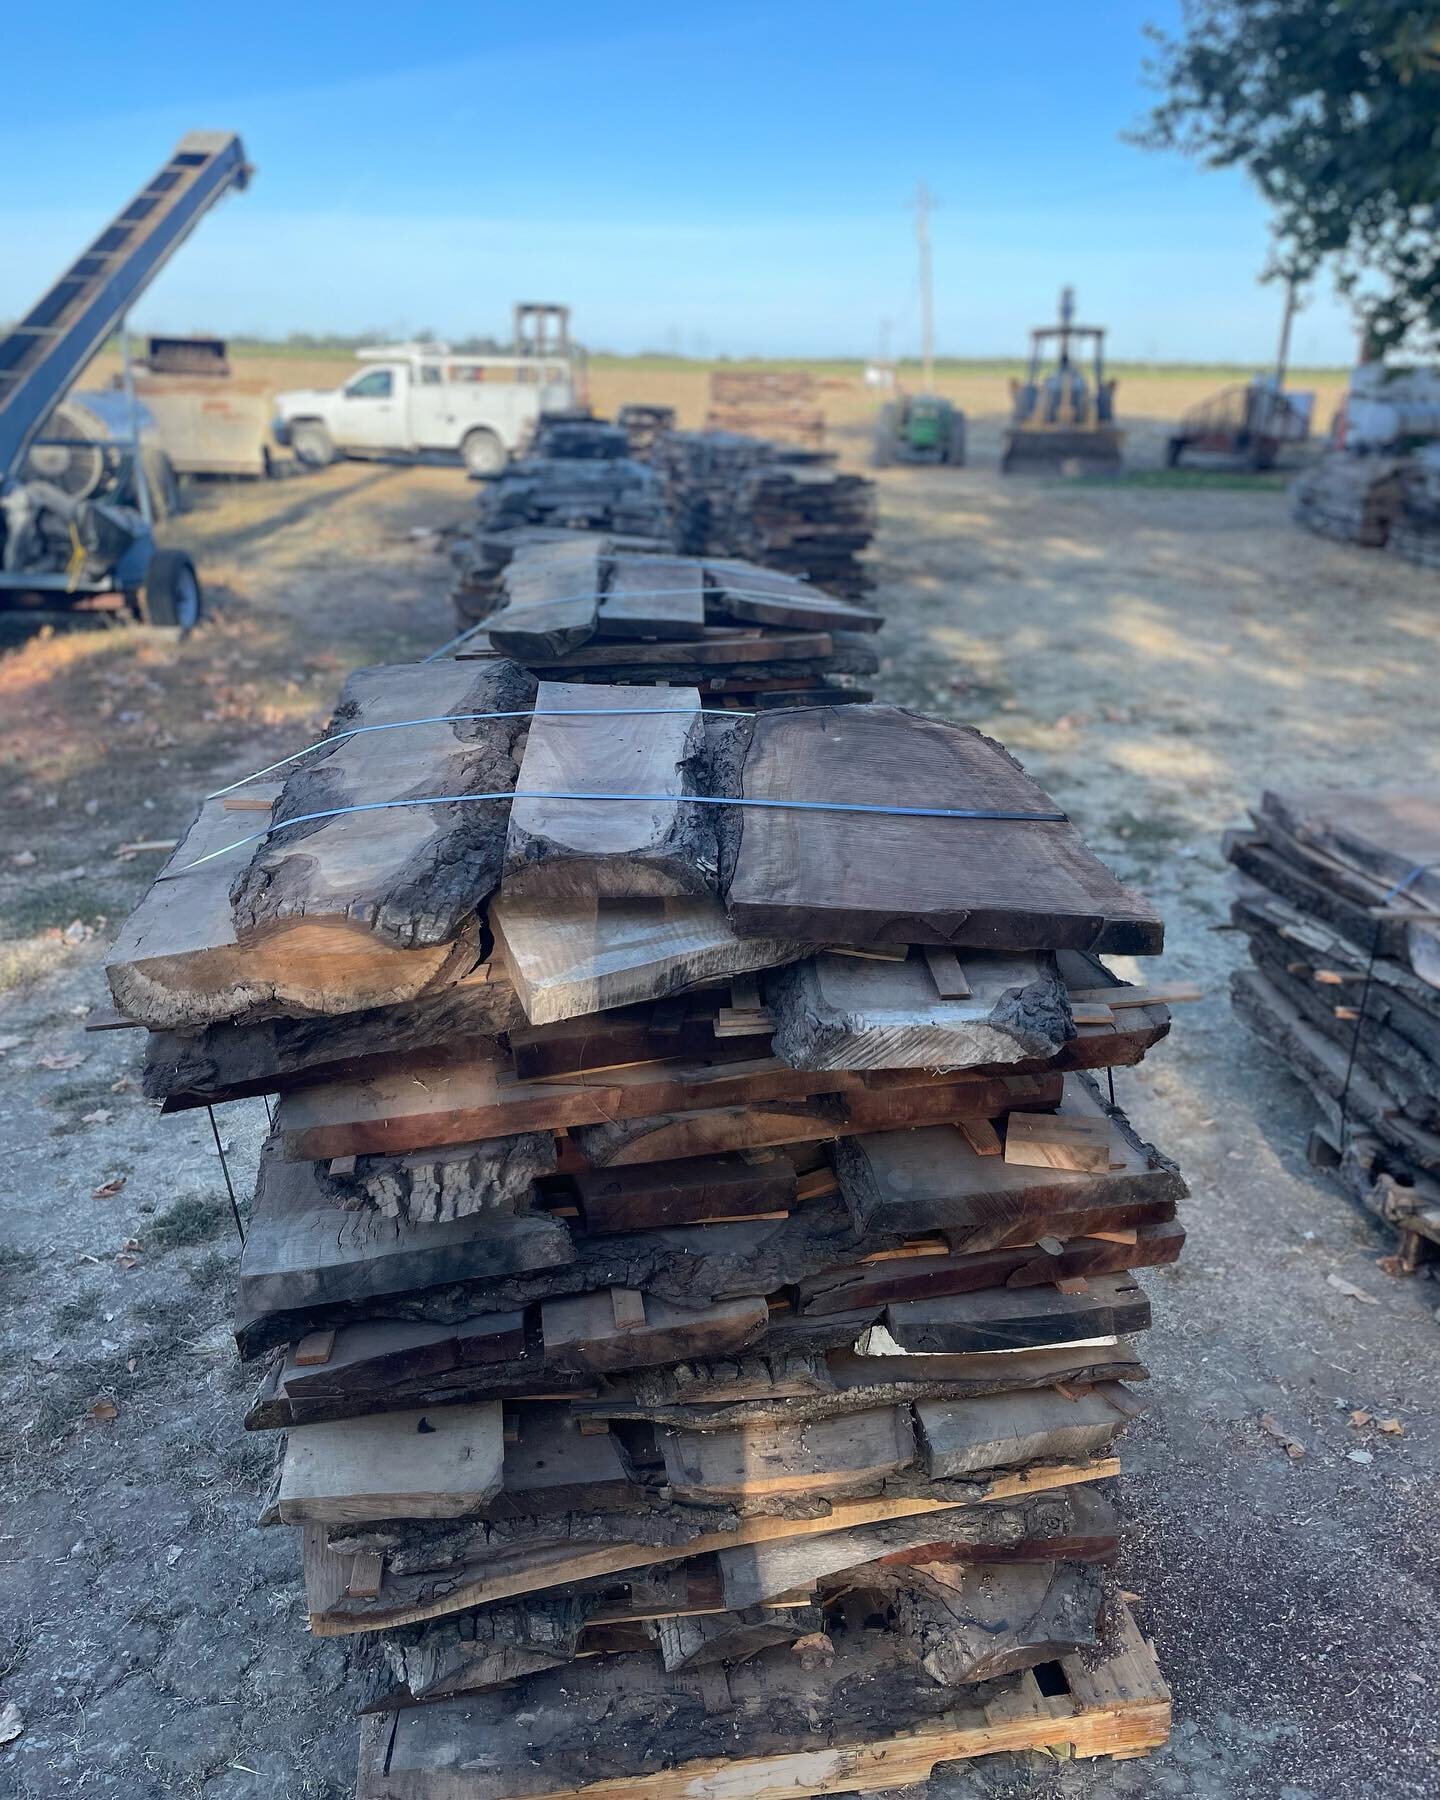 Farm Manager, Sean, coordinated, packed, and loaded our walnut wood for its next journey.
Removing our 60 year old walnut orchard is bittersweet. On one hand, a forest of memories and productivity that have helped sustain us for decades is gone. On t